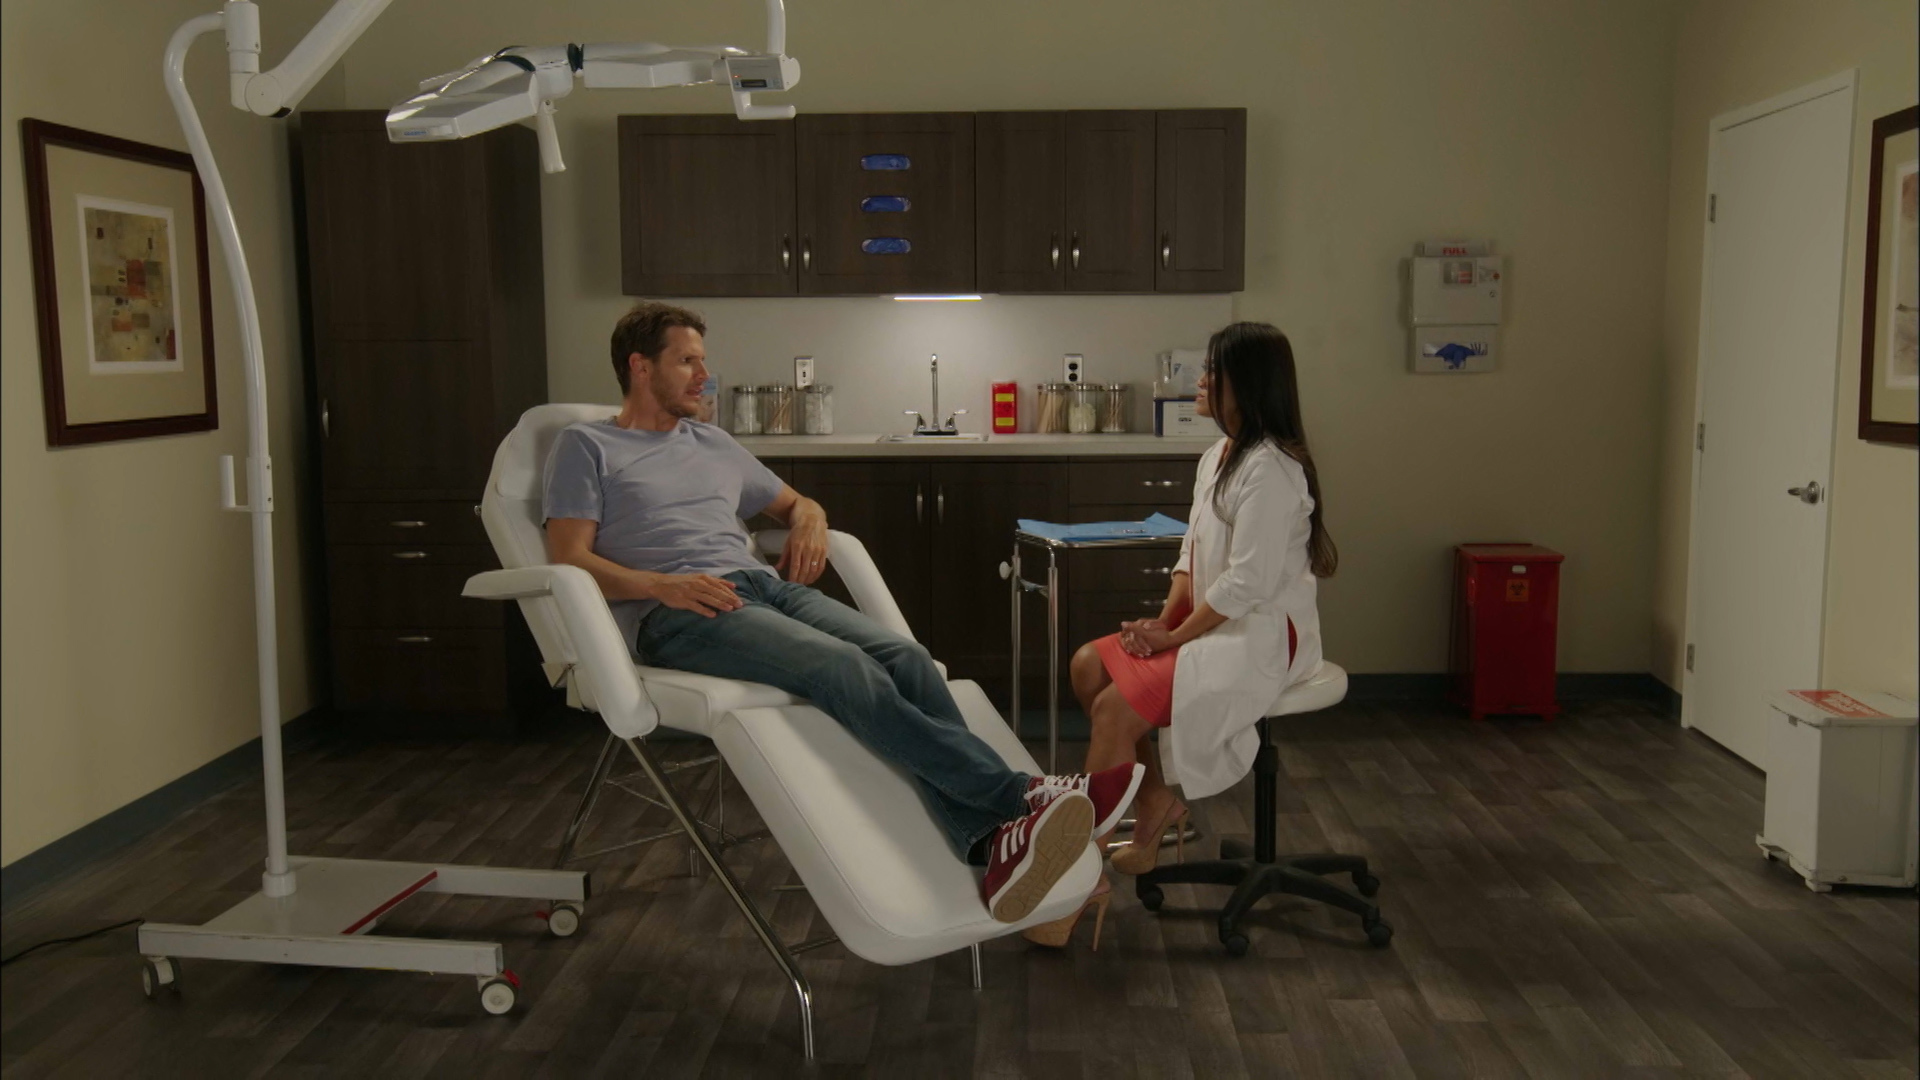 Watch Tosh.0 Season 8 Episode 12: 14, 2016 - Dr. Popper - Full show on Paramount Plus